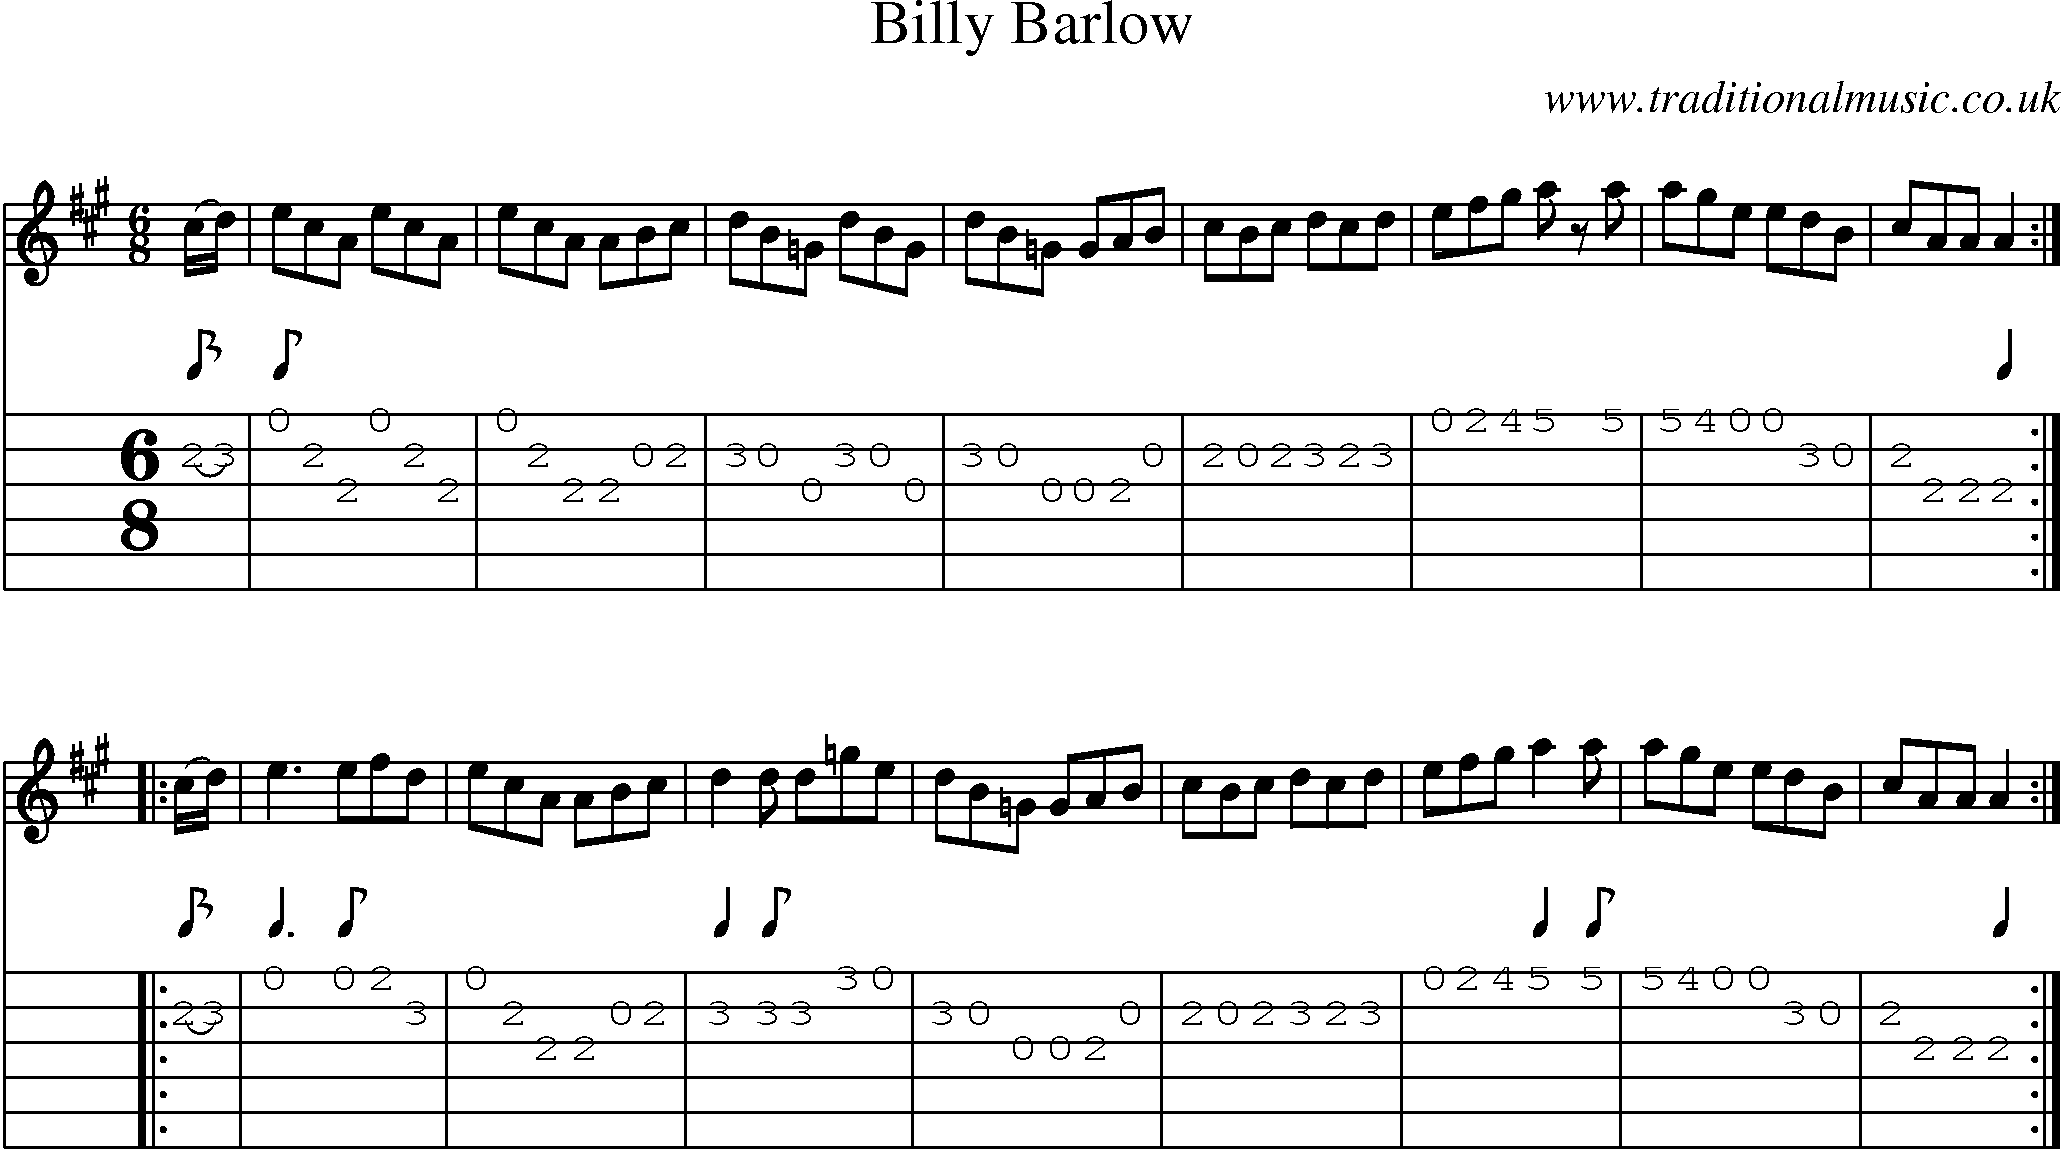 Music Score and Guitar Tabs for Billy Barlow